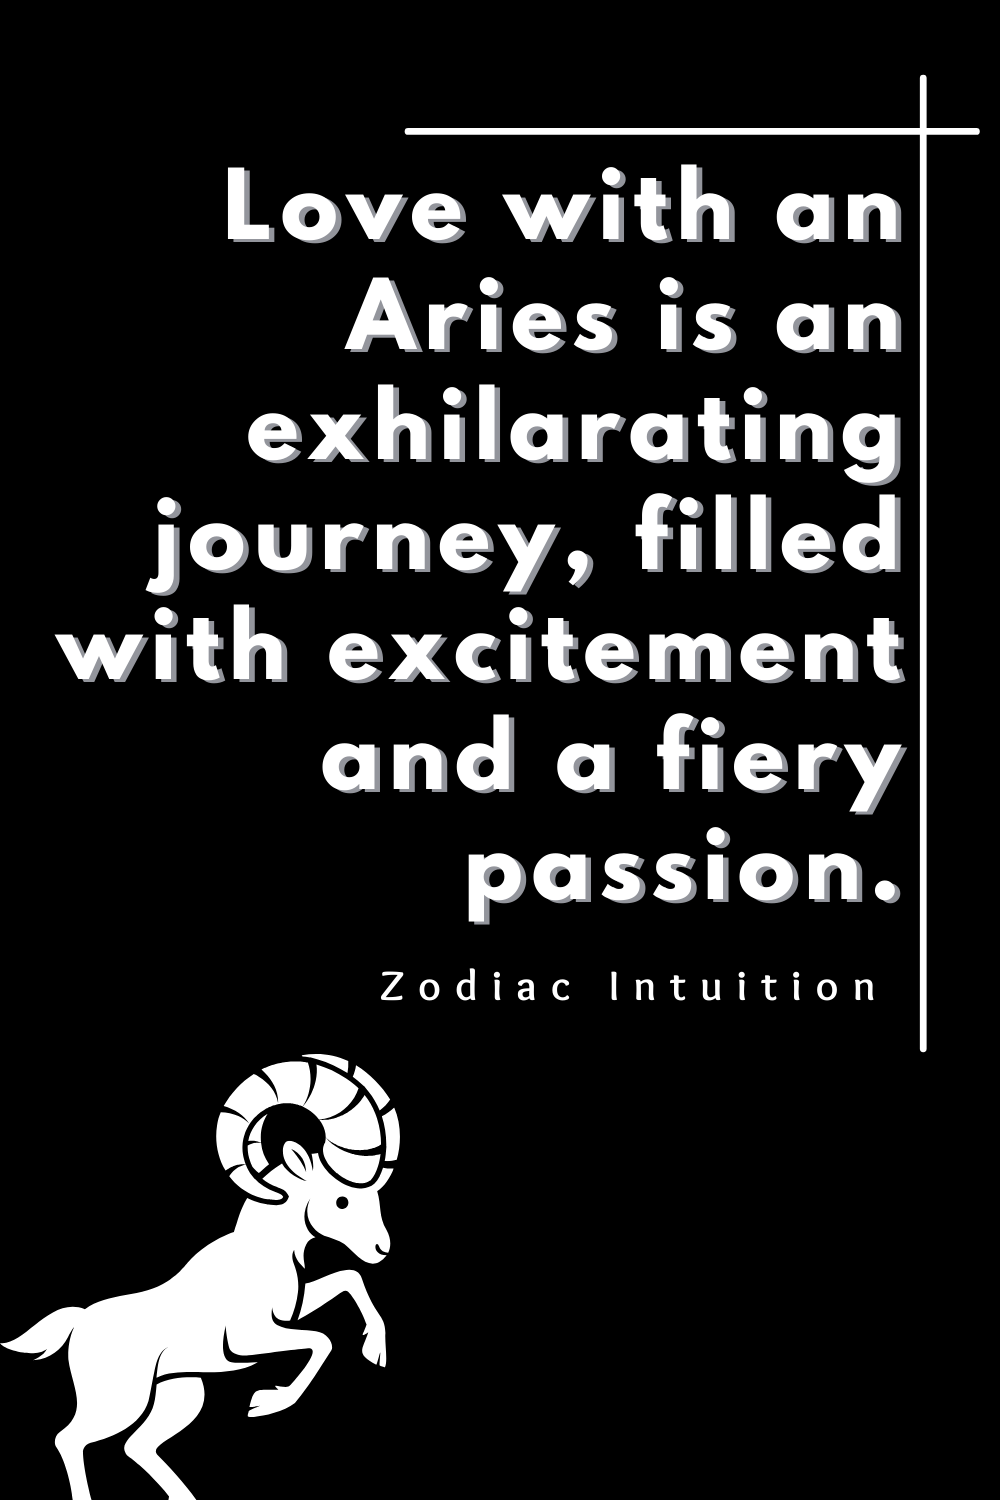 Love with an Aries is an exhilarating journey, filled with excitement and a fiery passion.